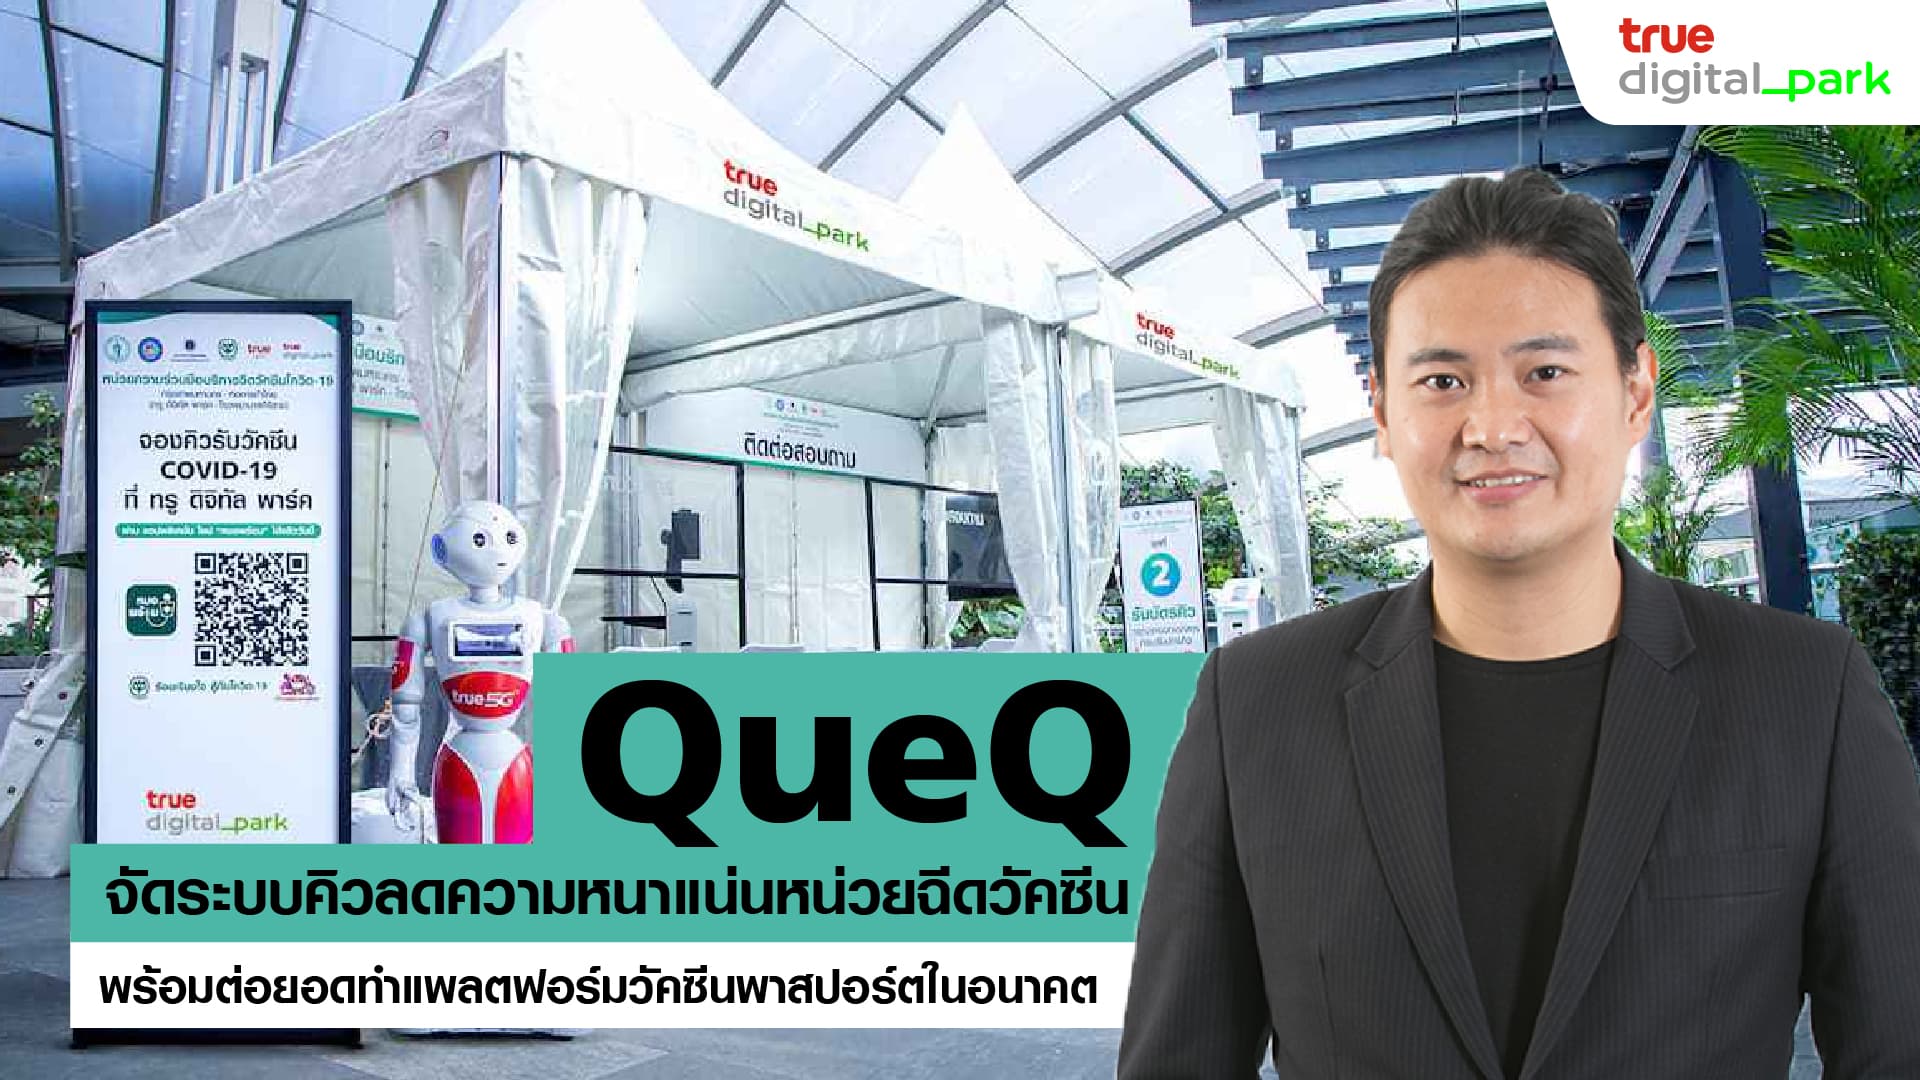 Reducing the crowds at vaccine units, Thai startup “QueQ” works quickly to implement queuing system